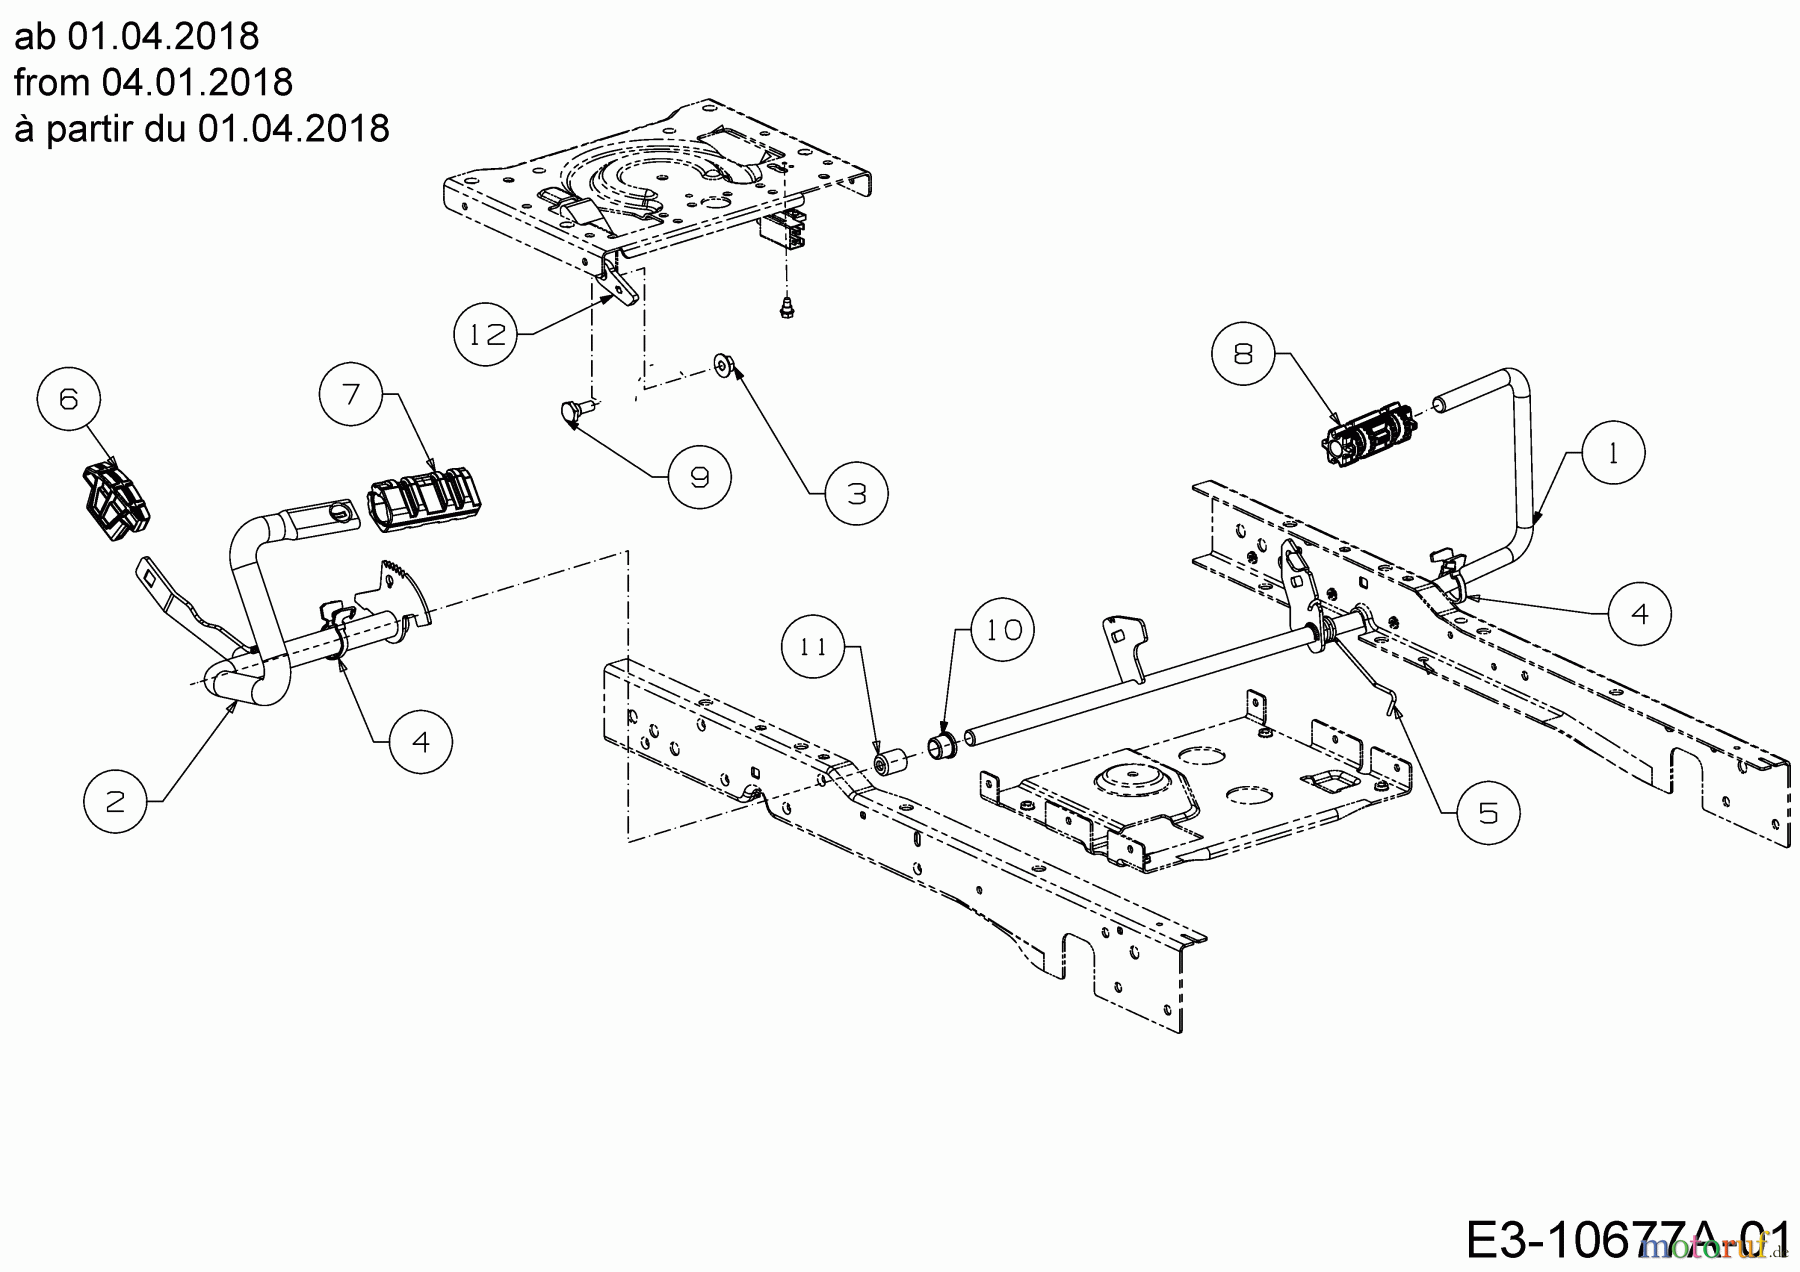  Greenbase Lawn tractors V 162 C 13B8A1KF618 (2021) Pedals from 04.01.2018